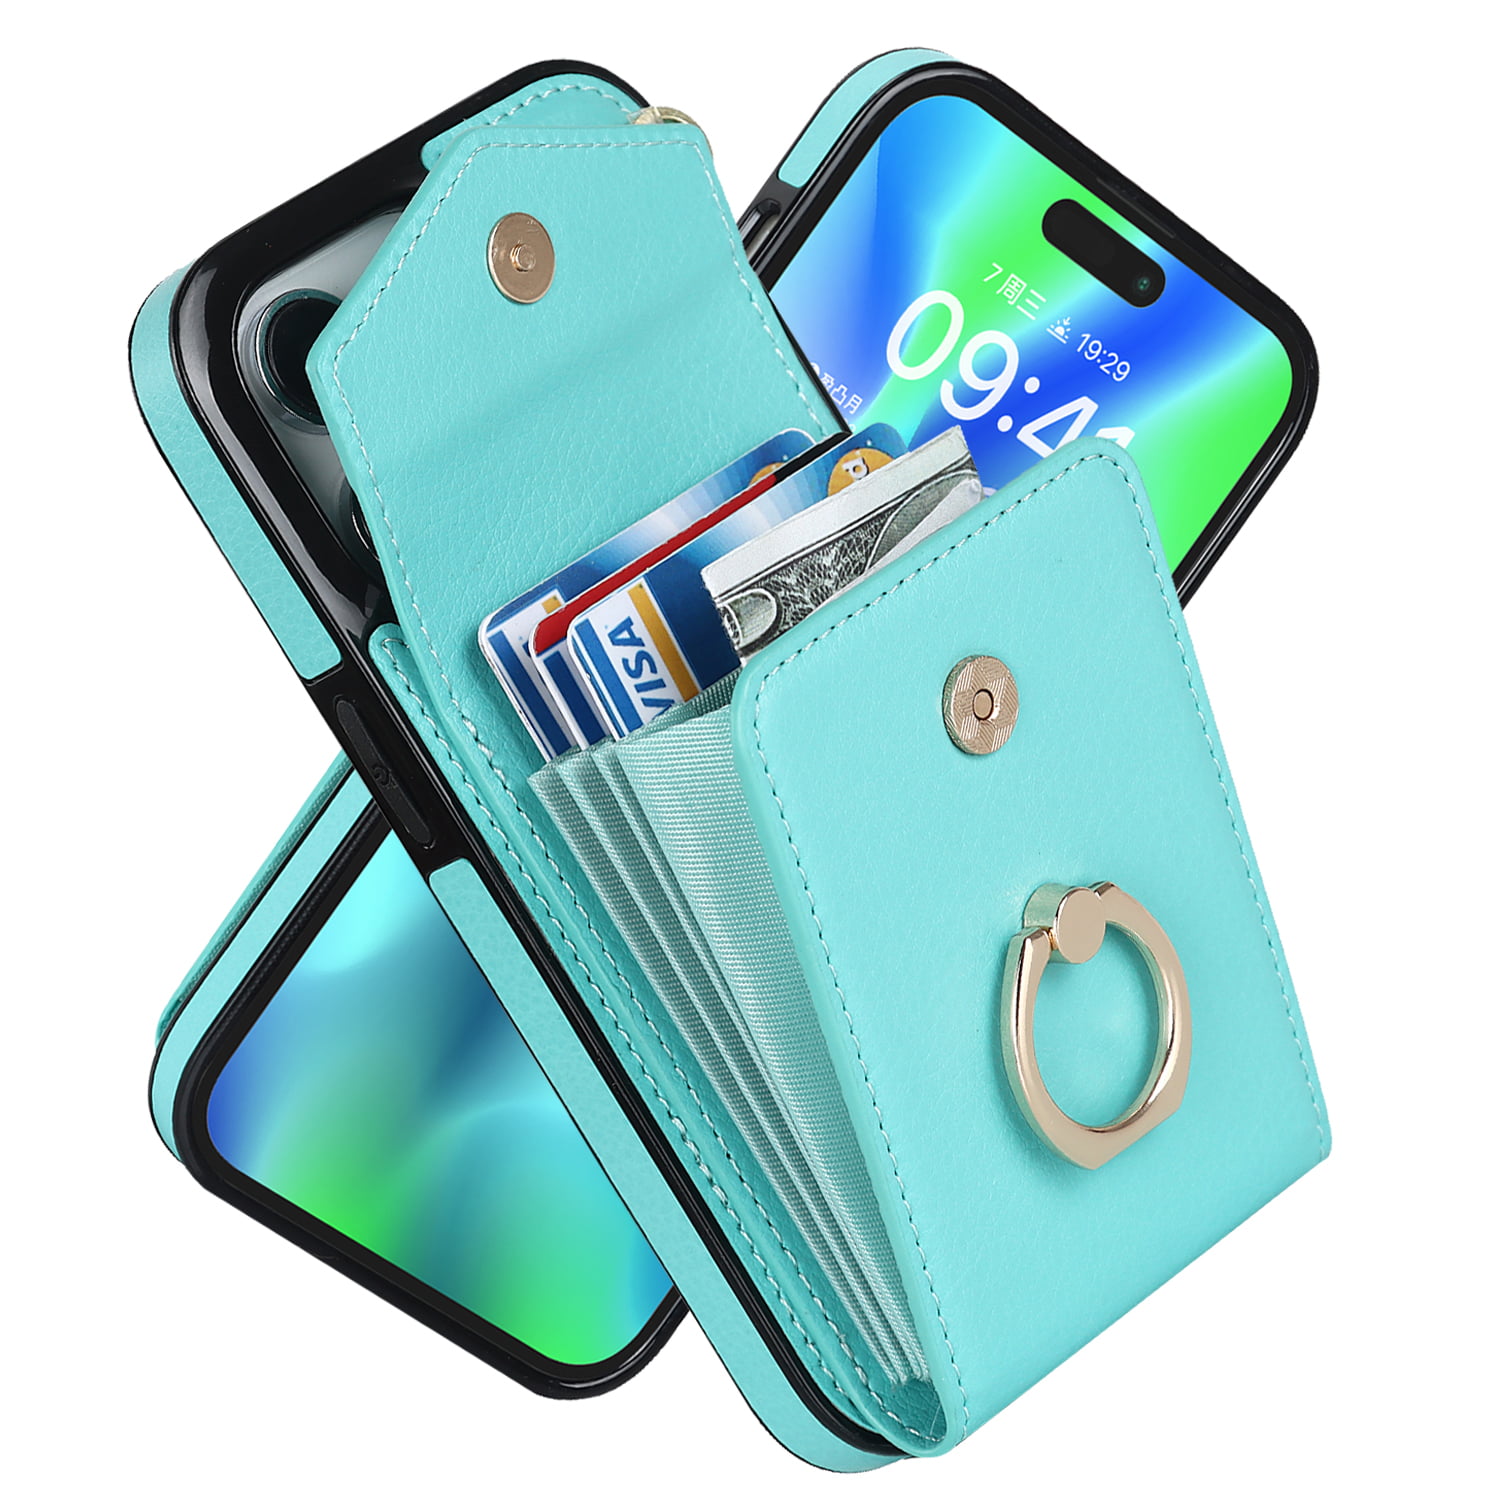 Wallet Case for iPhone 13 Pro Max 6.7 inch 2021, Allytech Lightweight Thin Slim Hard Back Card Slot Magnetic Vertical and Horizontal Stand Shockproof